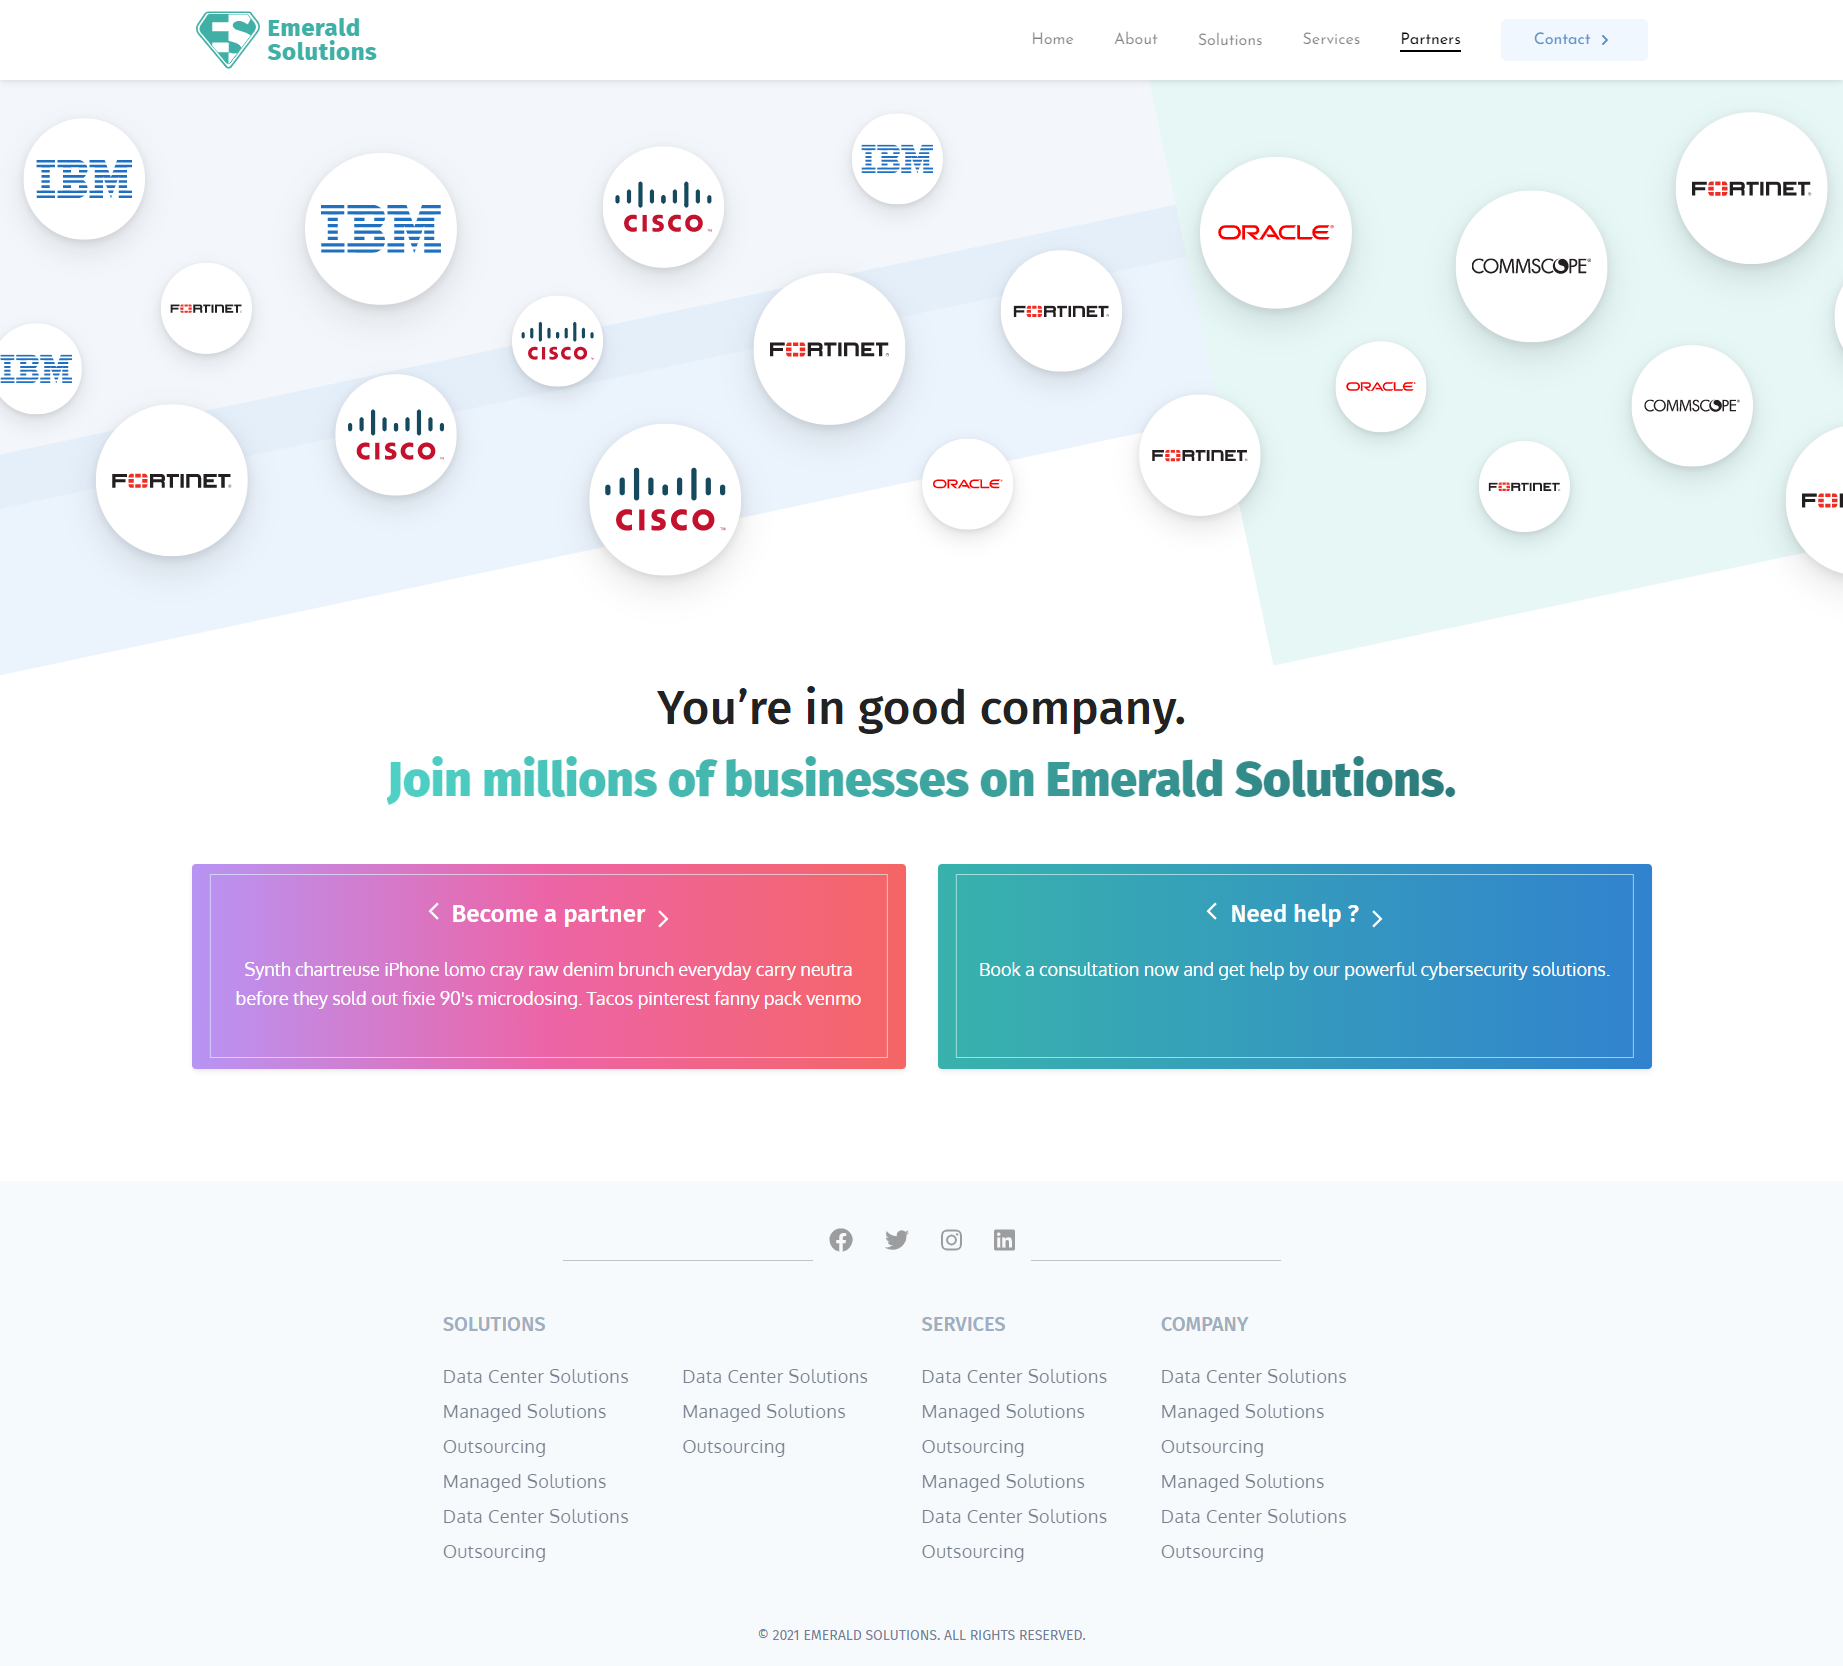 Emerald solutions partners page